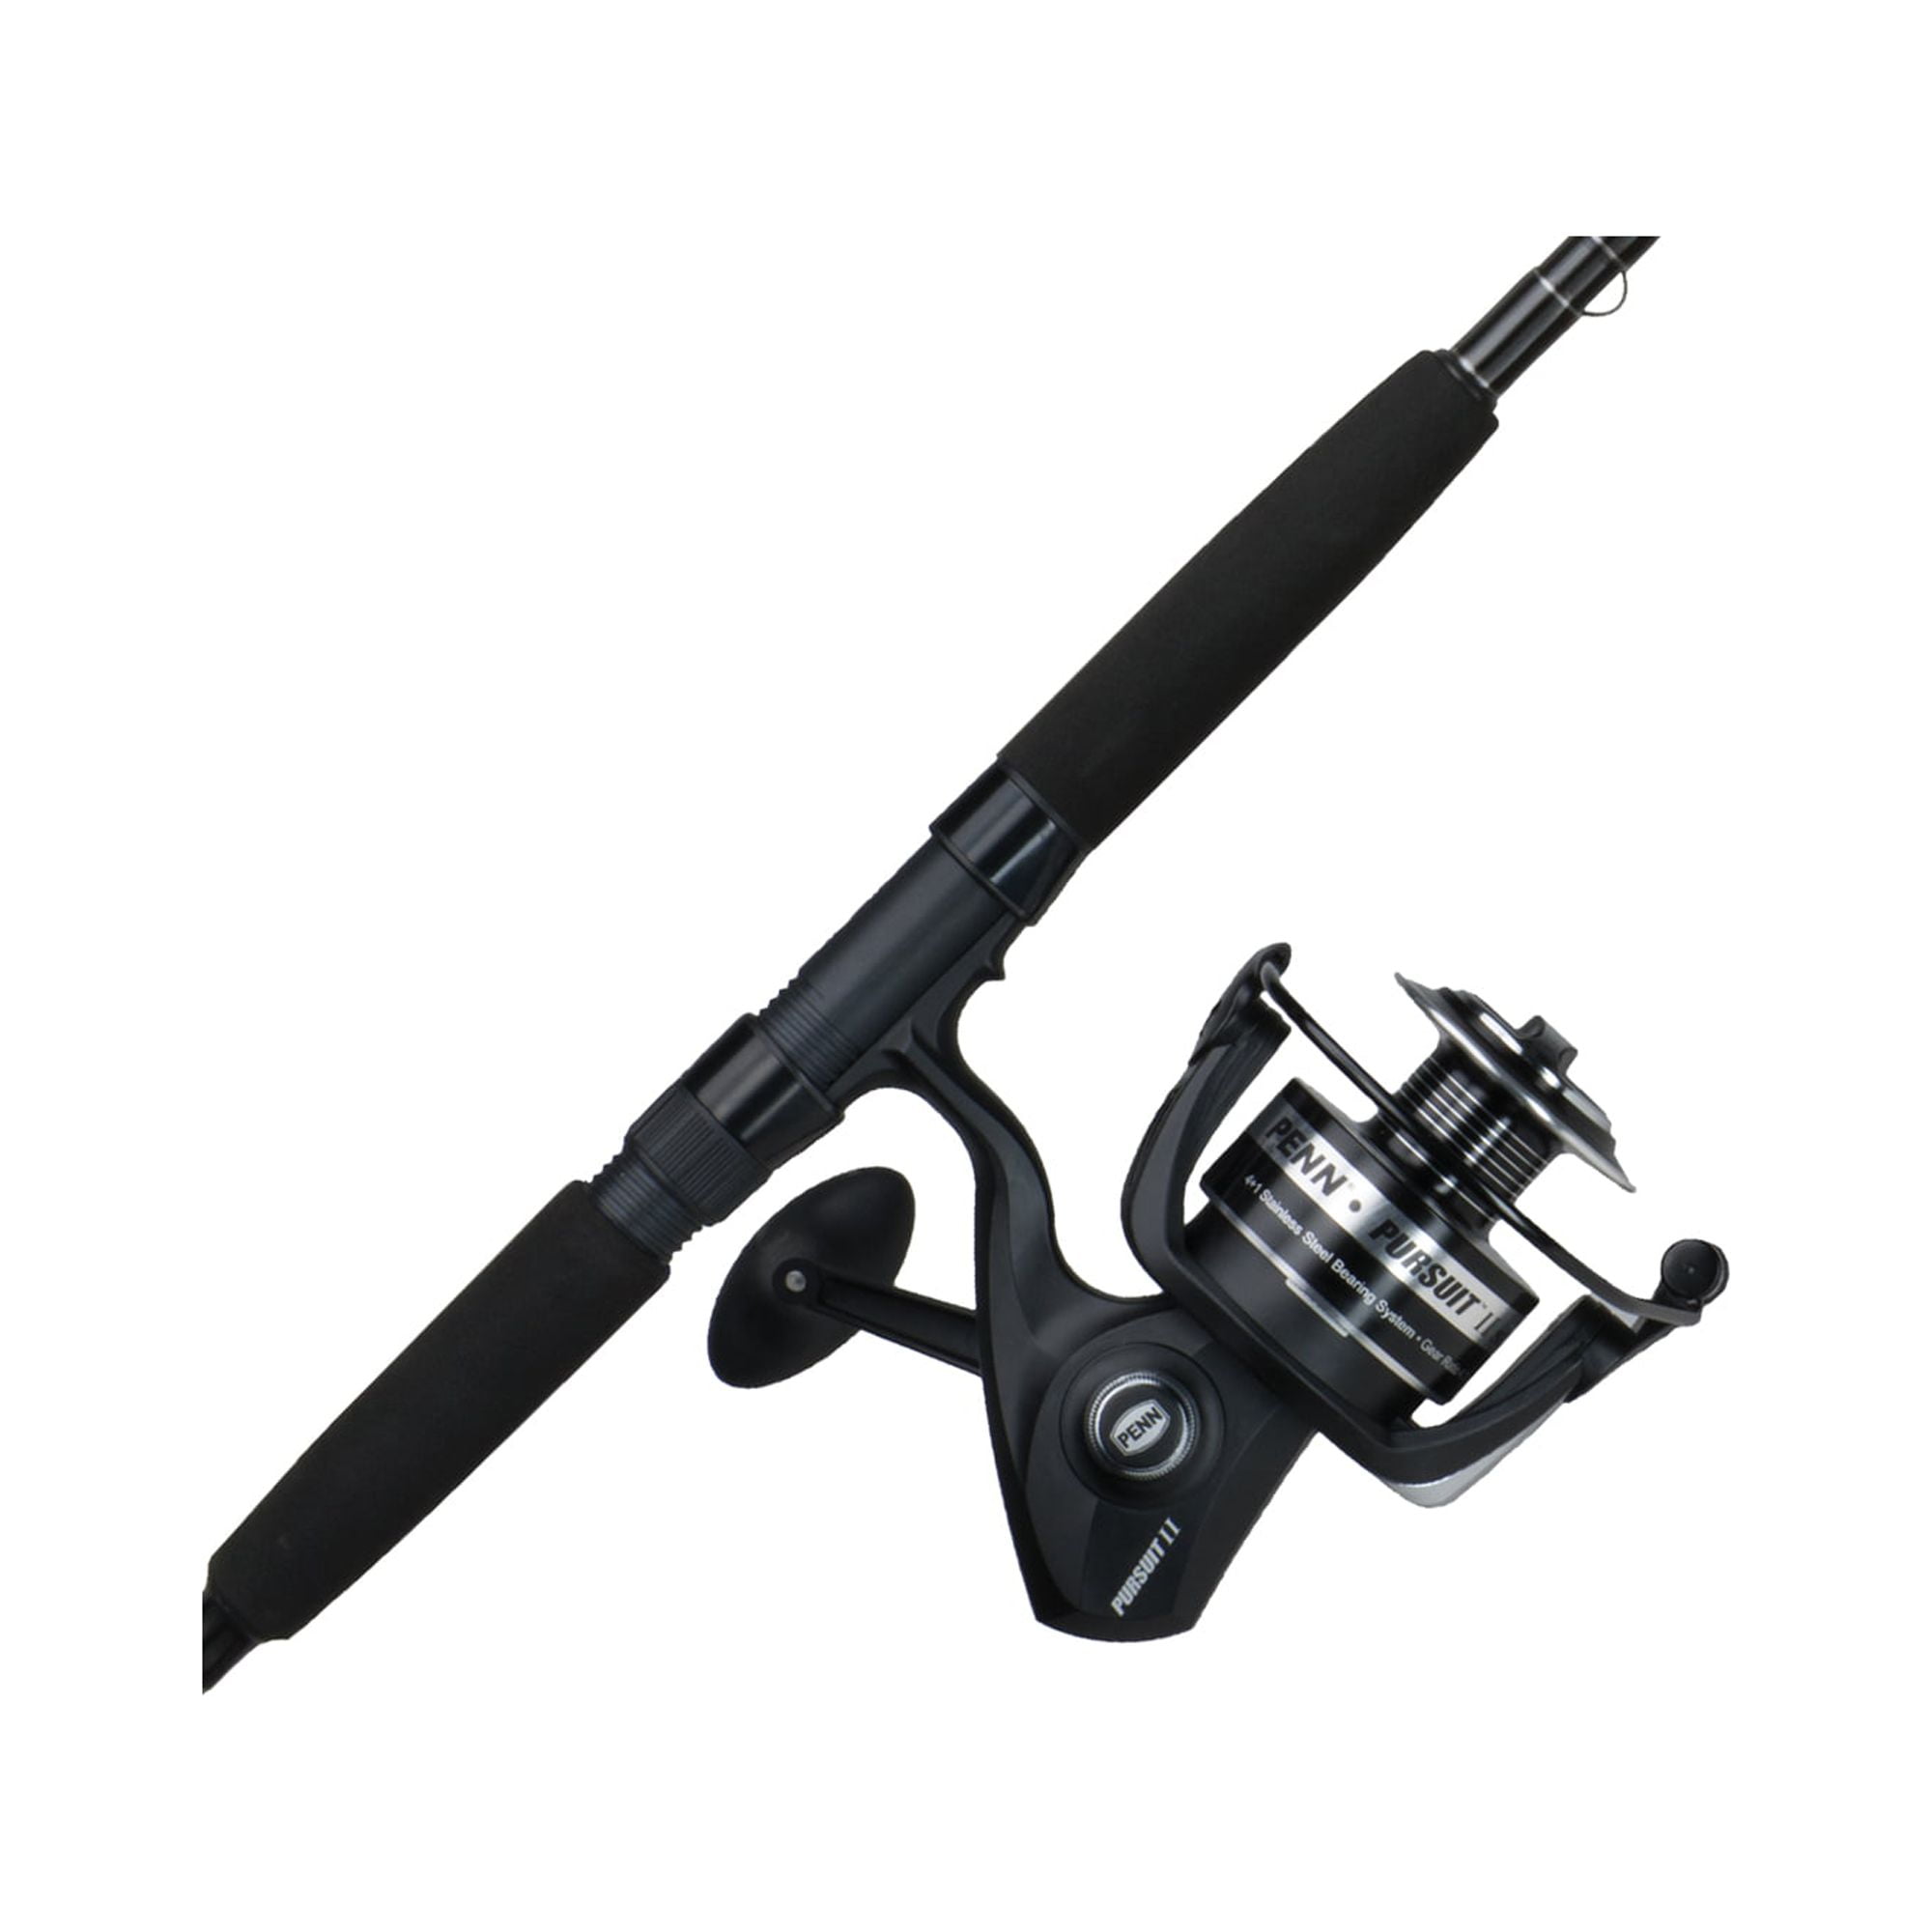 Penn Pursuit II Spinning Reel and Fishing Rod Combo